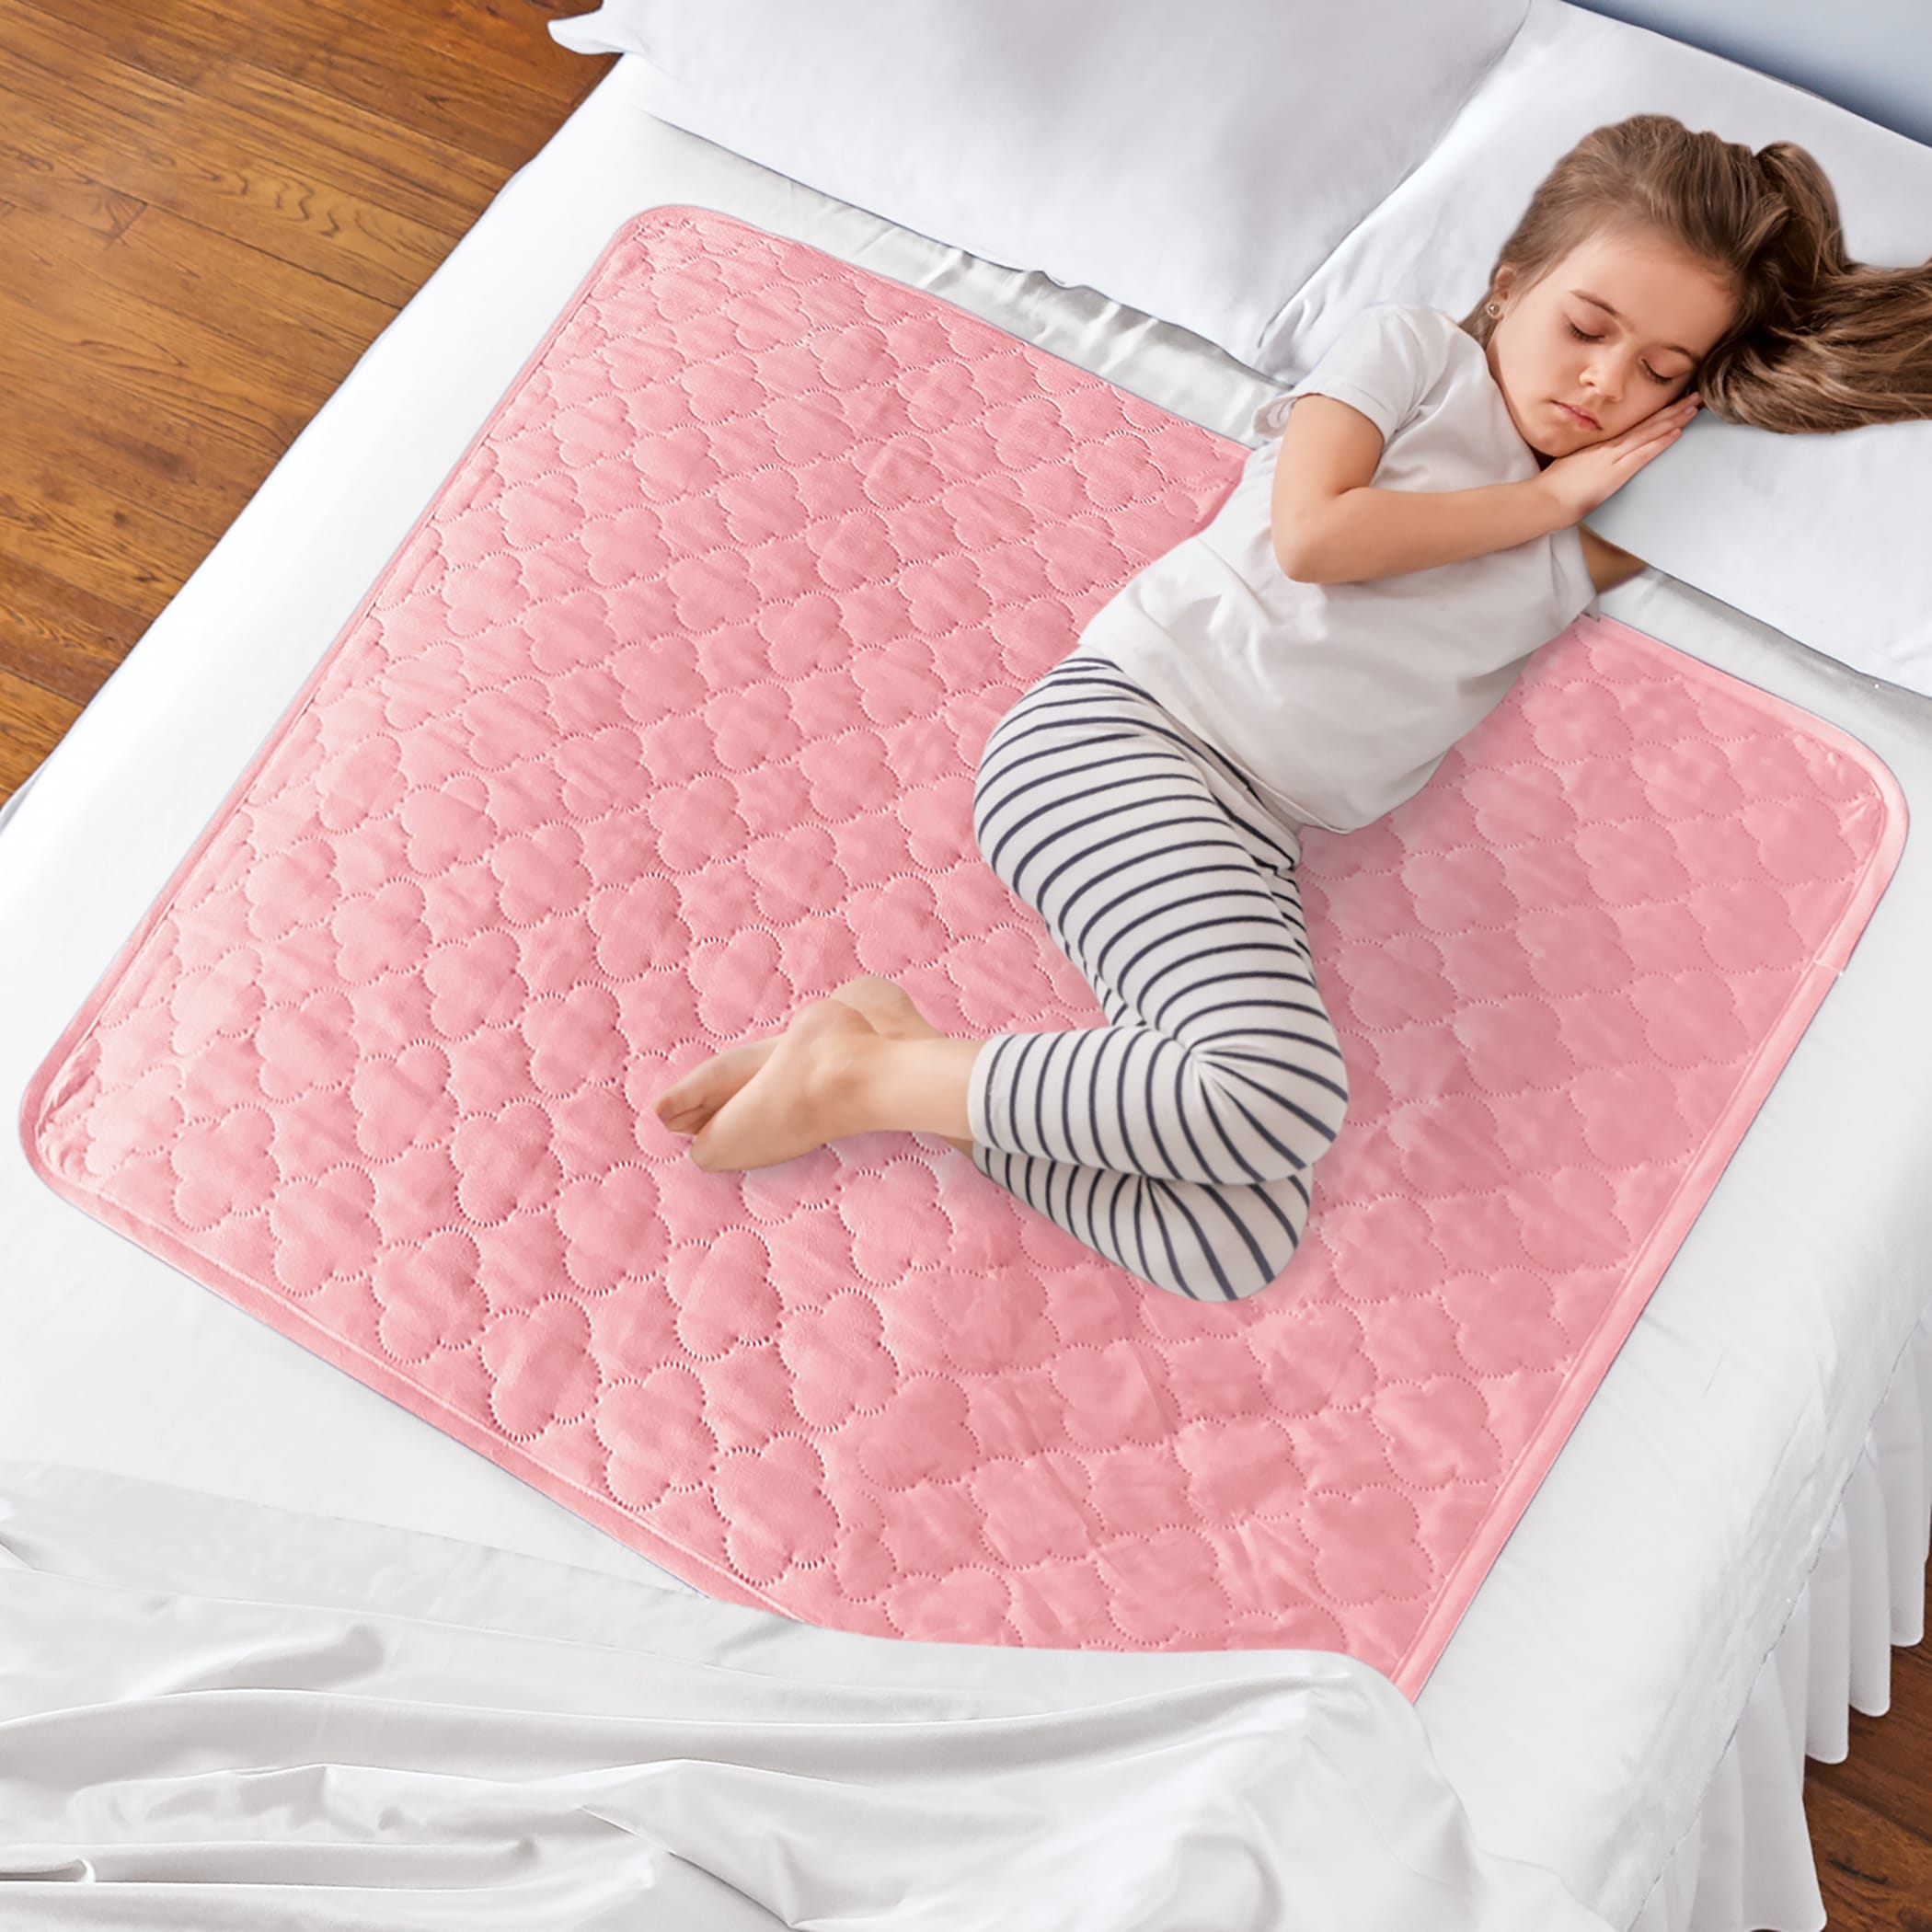 https://ak1.ostkcdn.com/images/products/is/images/direct/eba15d769ce70229fd7baeb0870604c169bd1adf/Highly-Absorbent-Washable-Waterproof-Bed-Pad.jpg